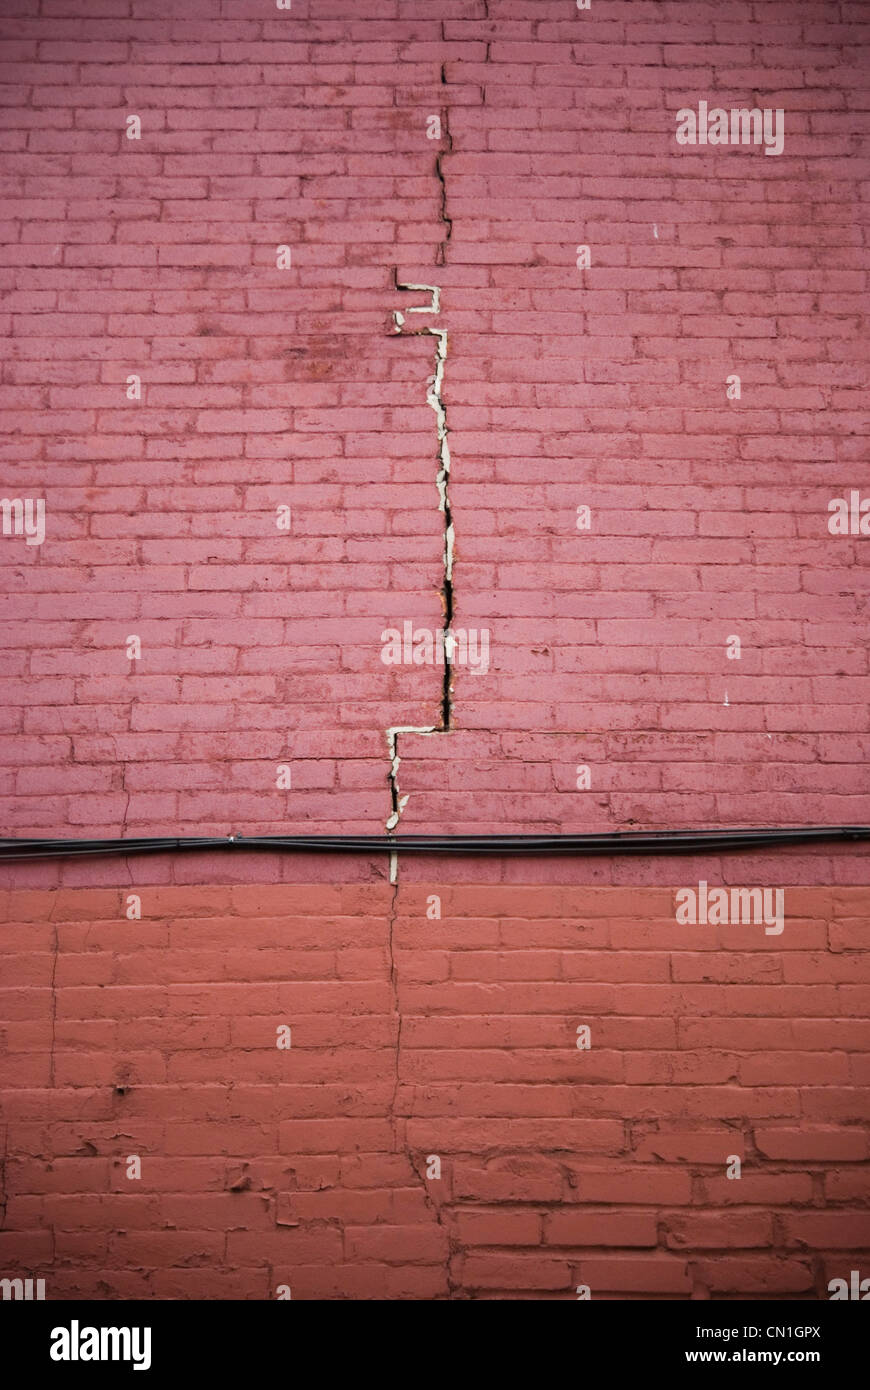 Crack in Red Brick Wall Stock Photo